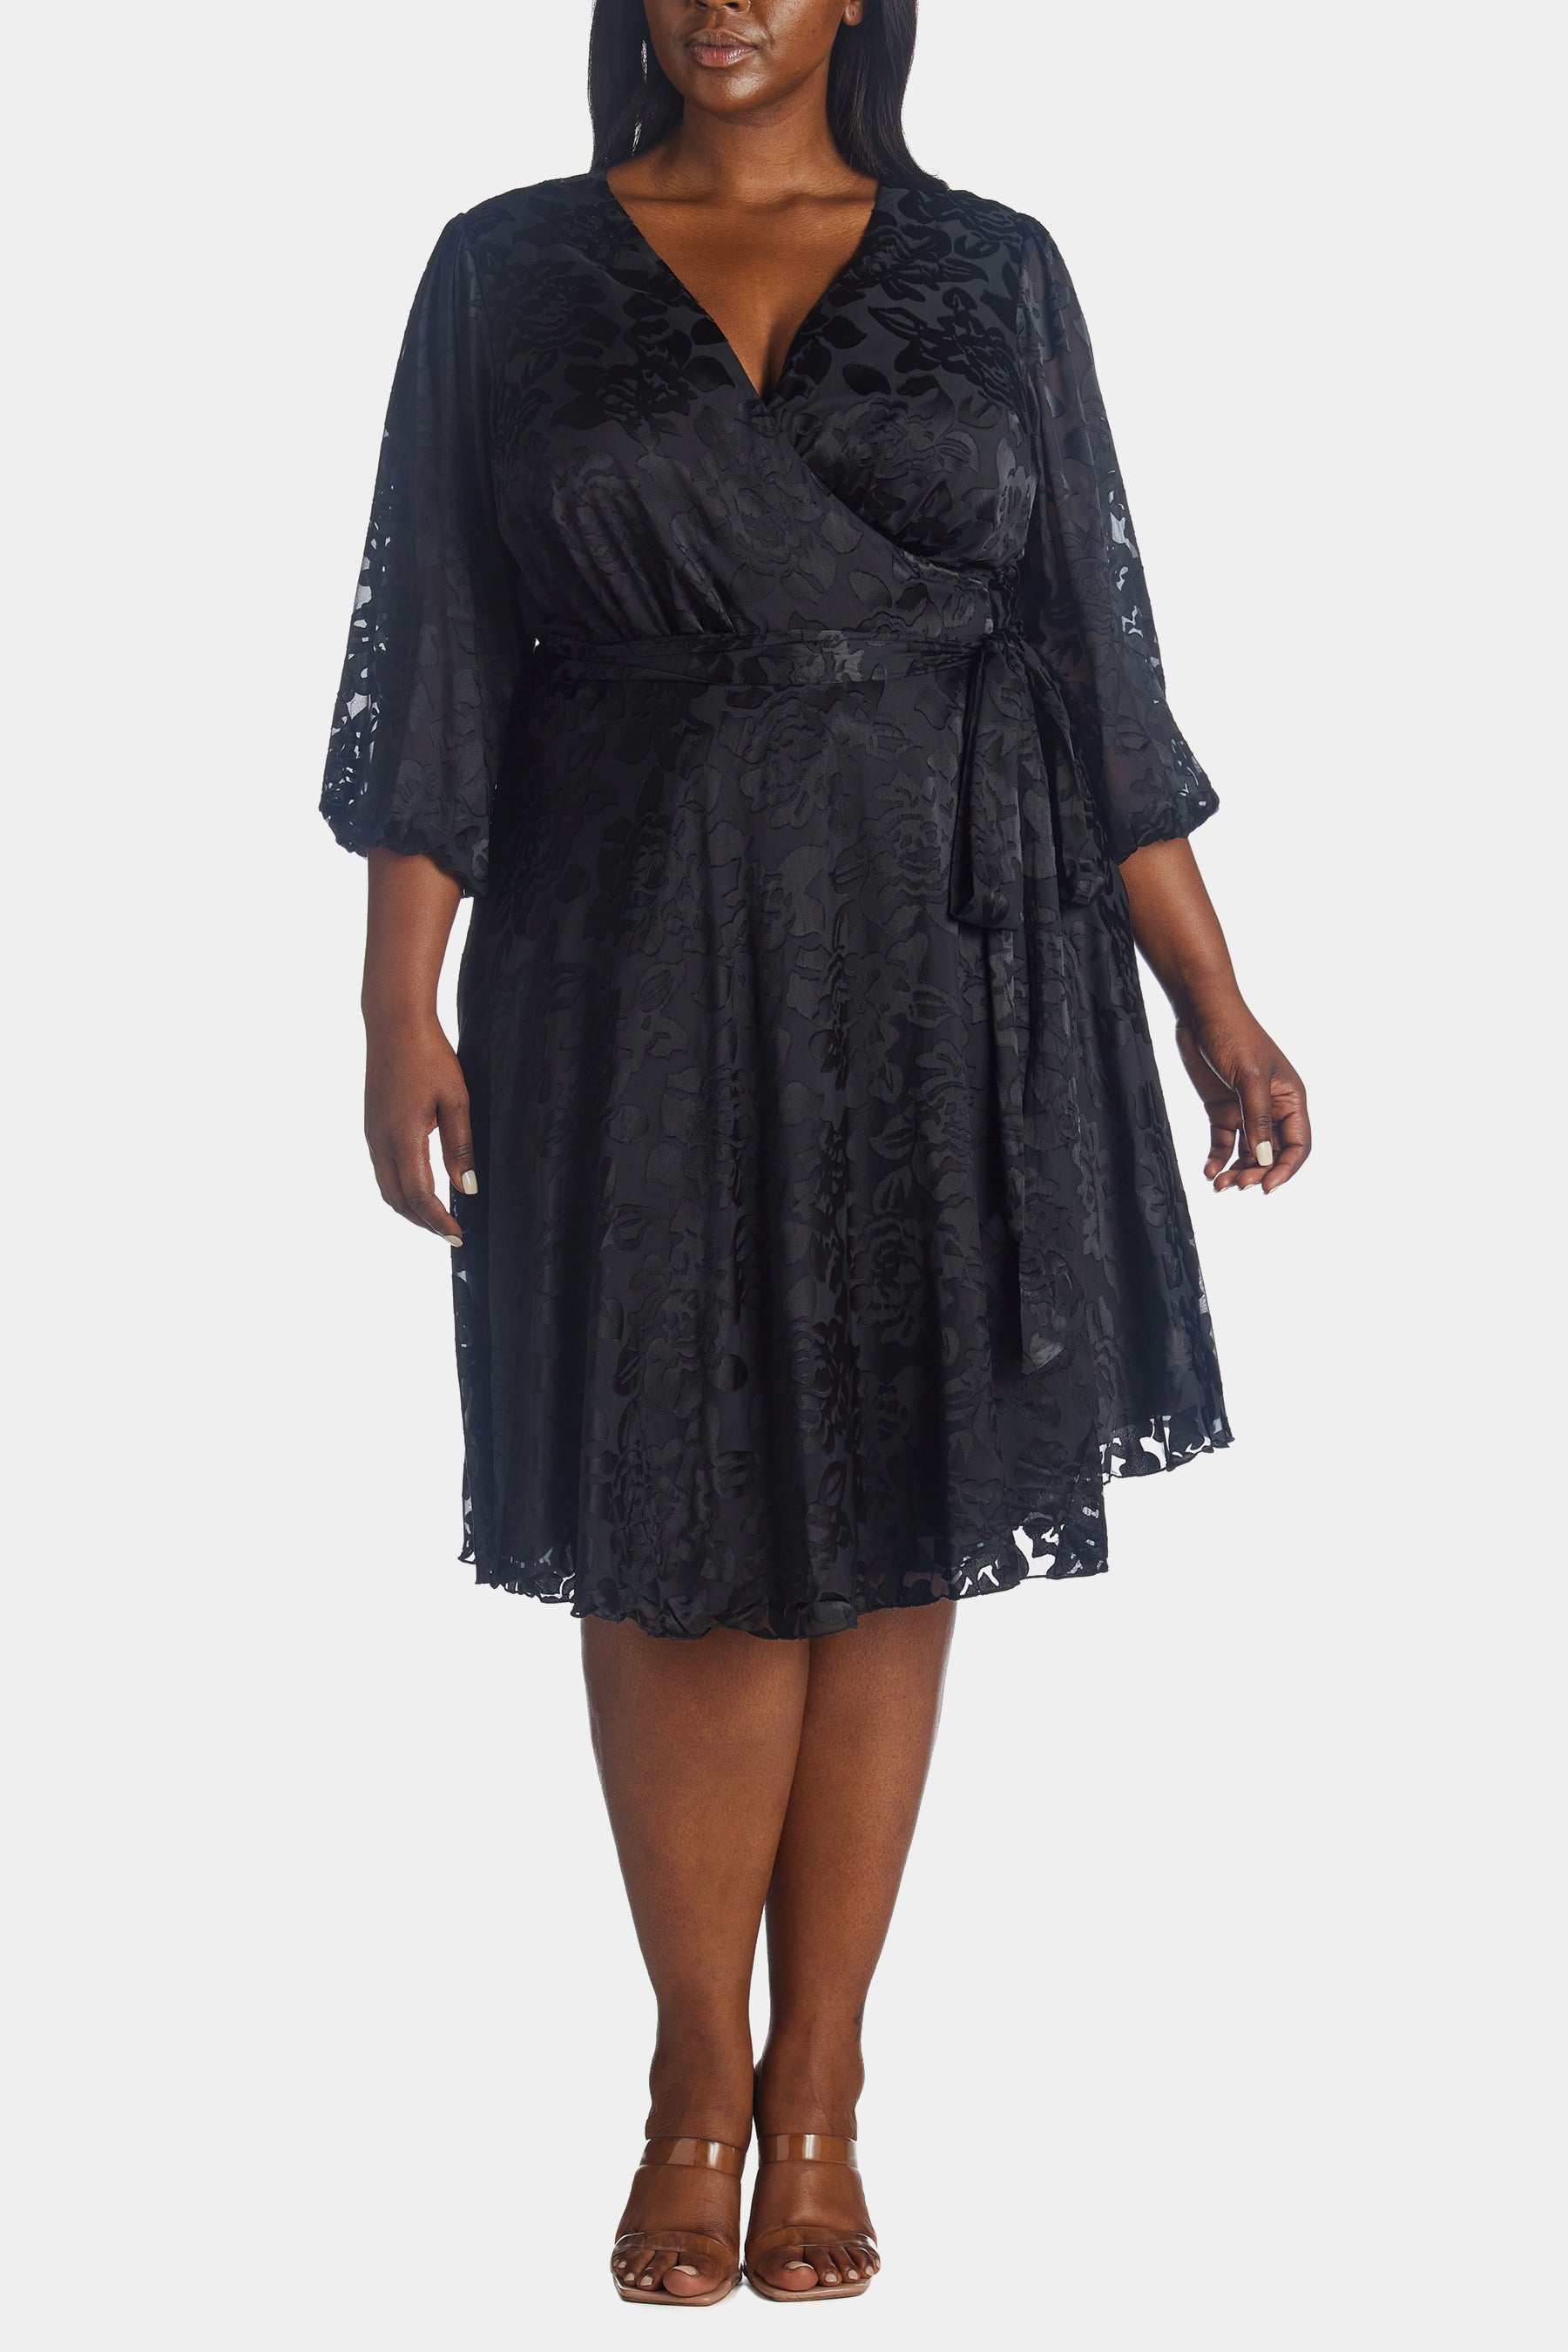 My Obsession With Lord & Taylor Plus Size Department